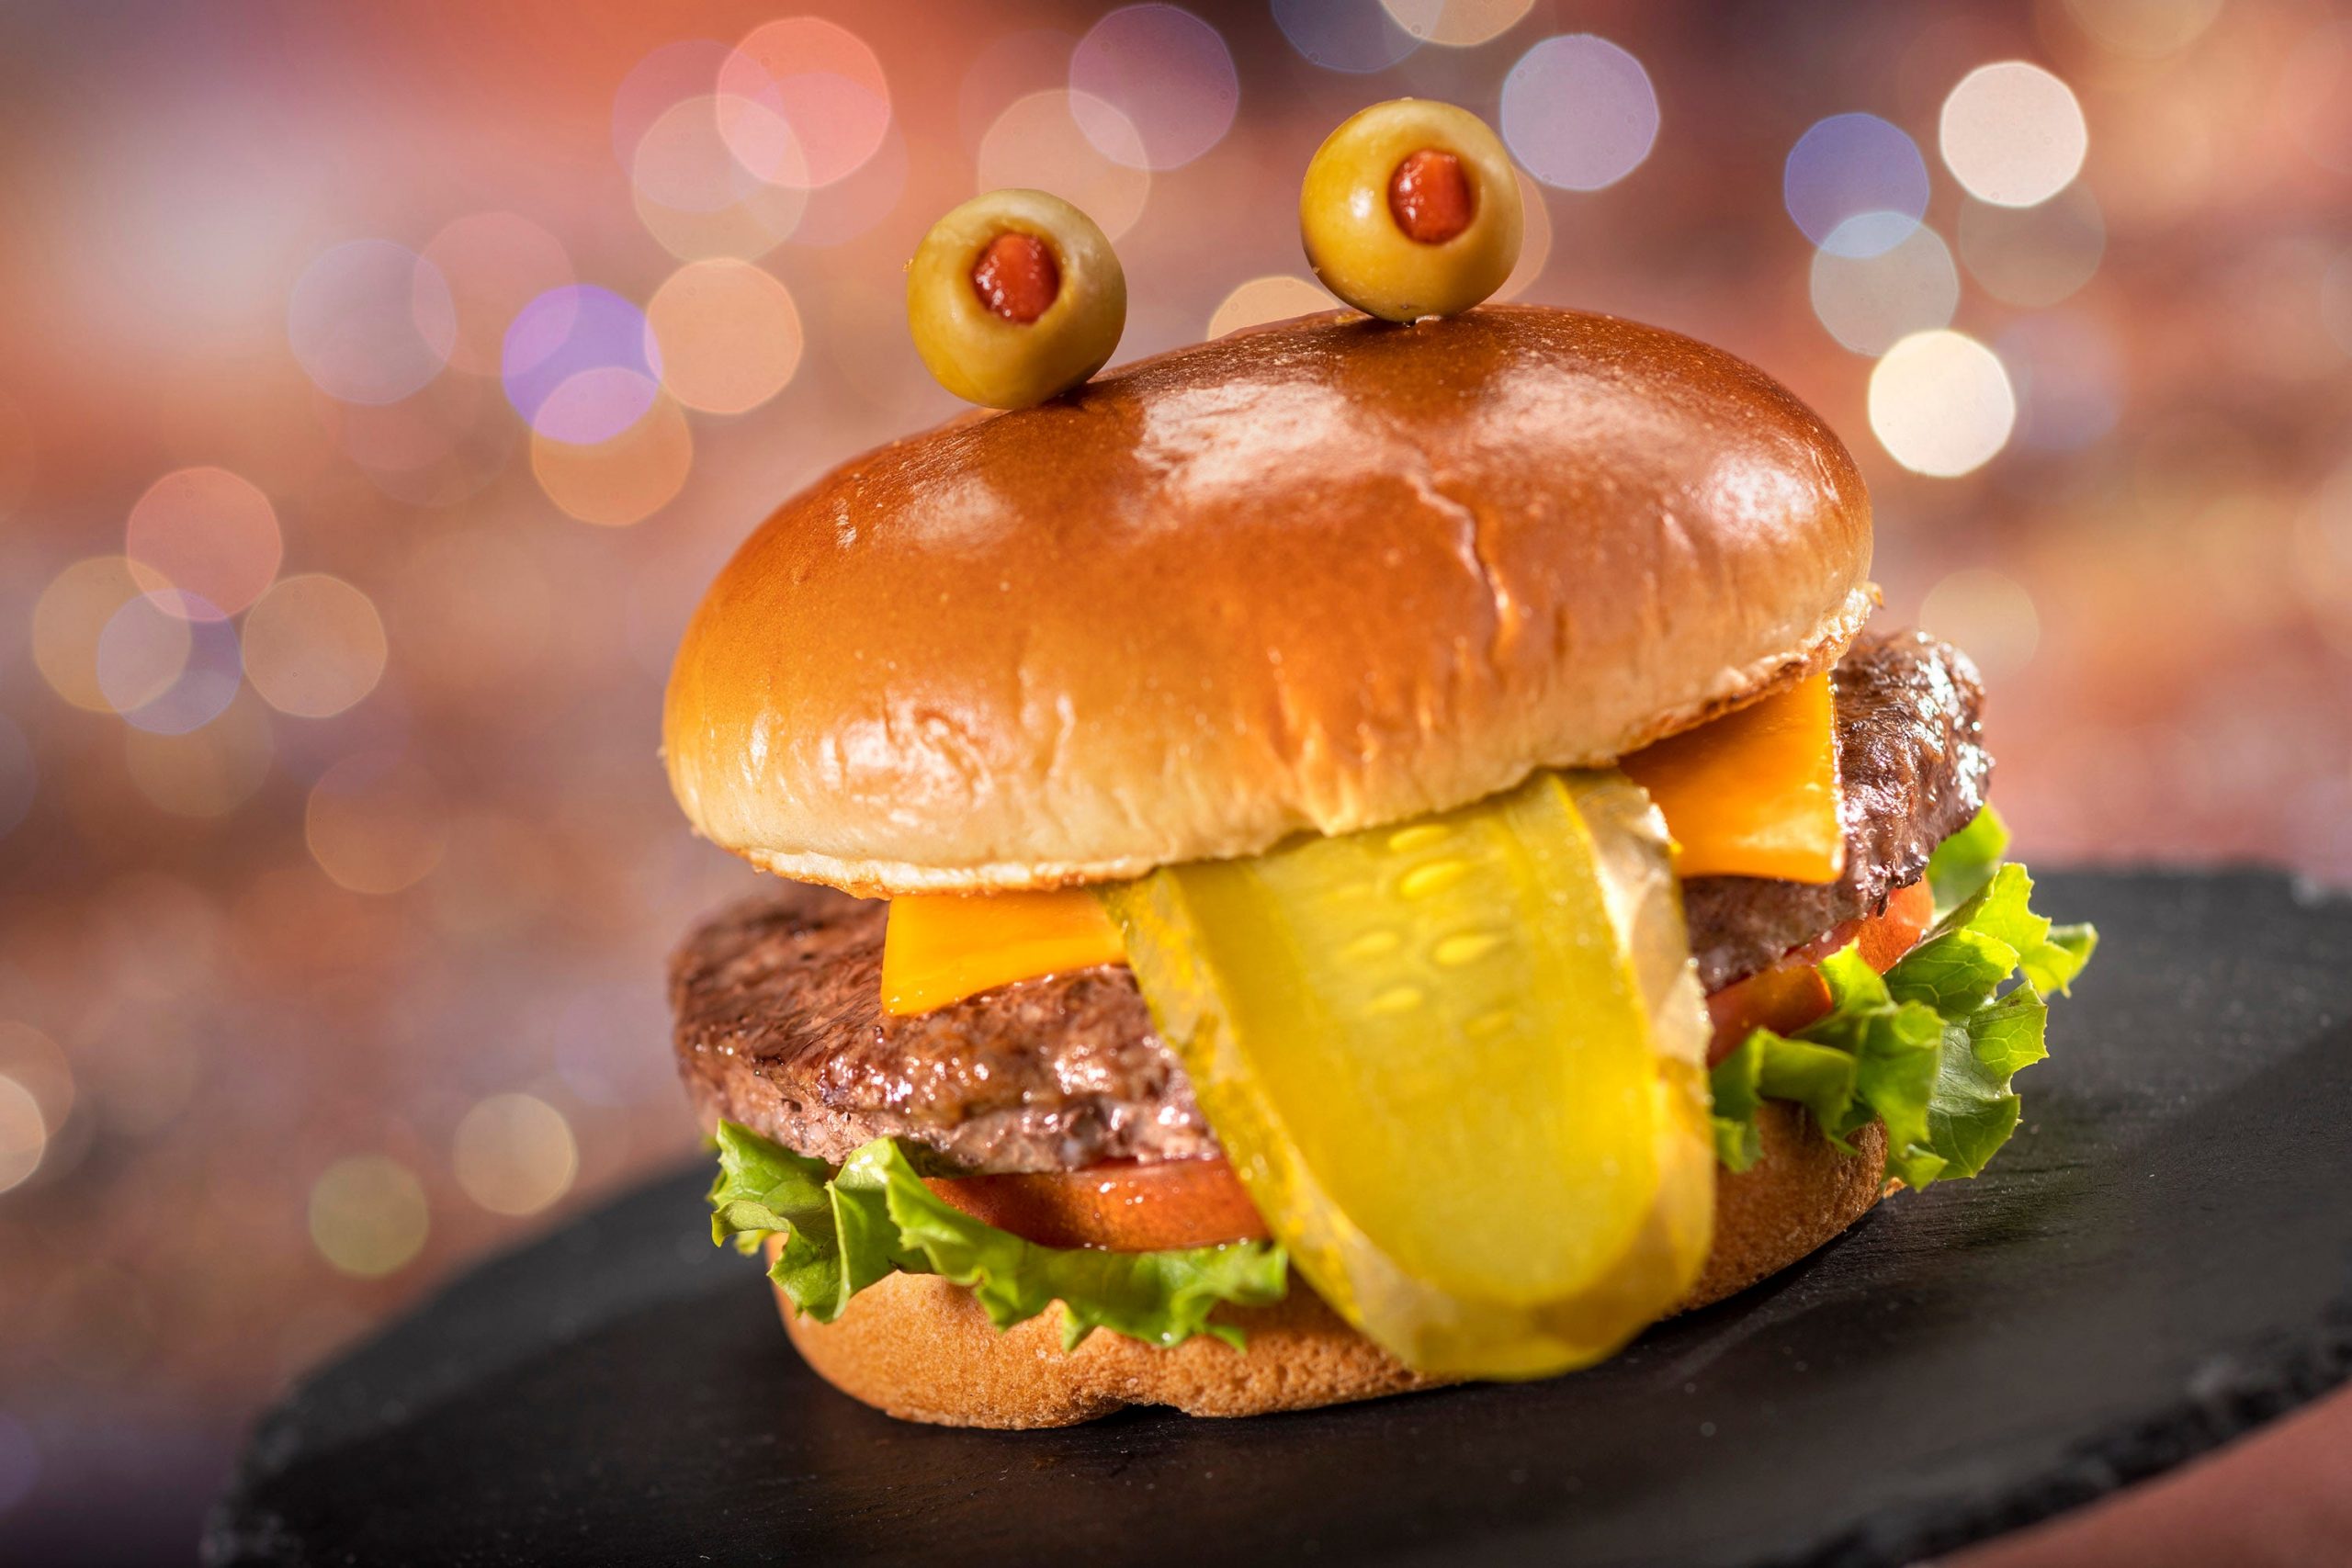 A hamburger with a pickle slice acting as a tongue and two olives on top of the bun, meant to resemble eyes.